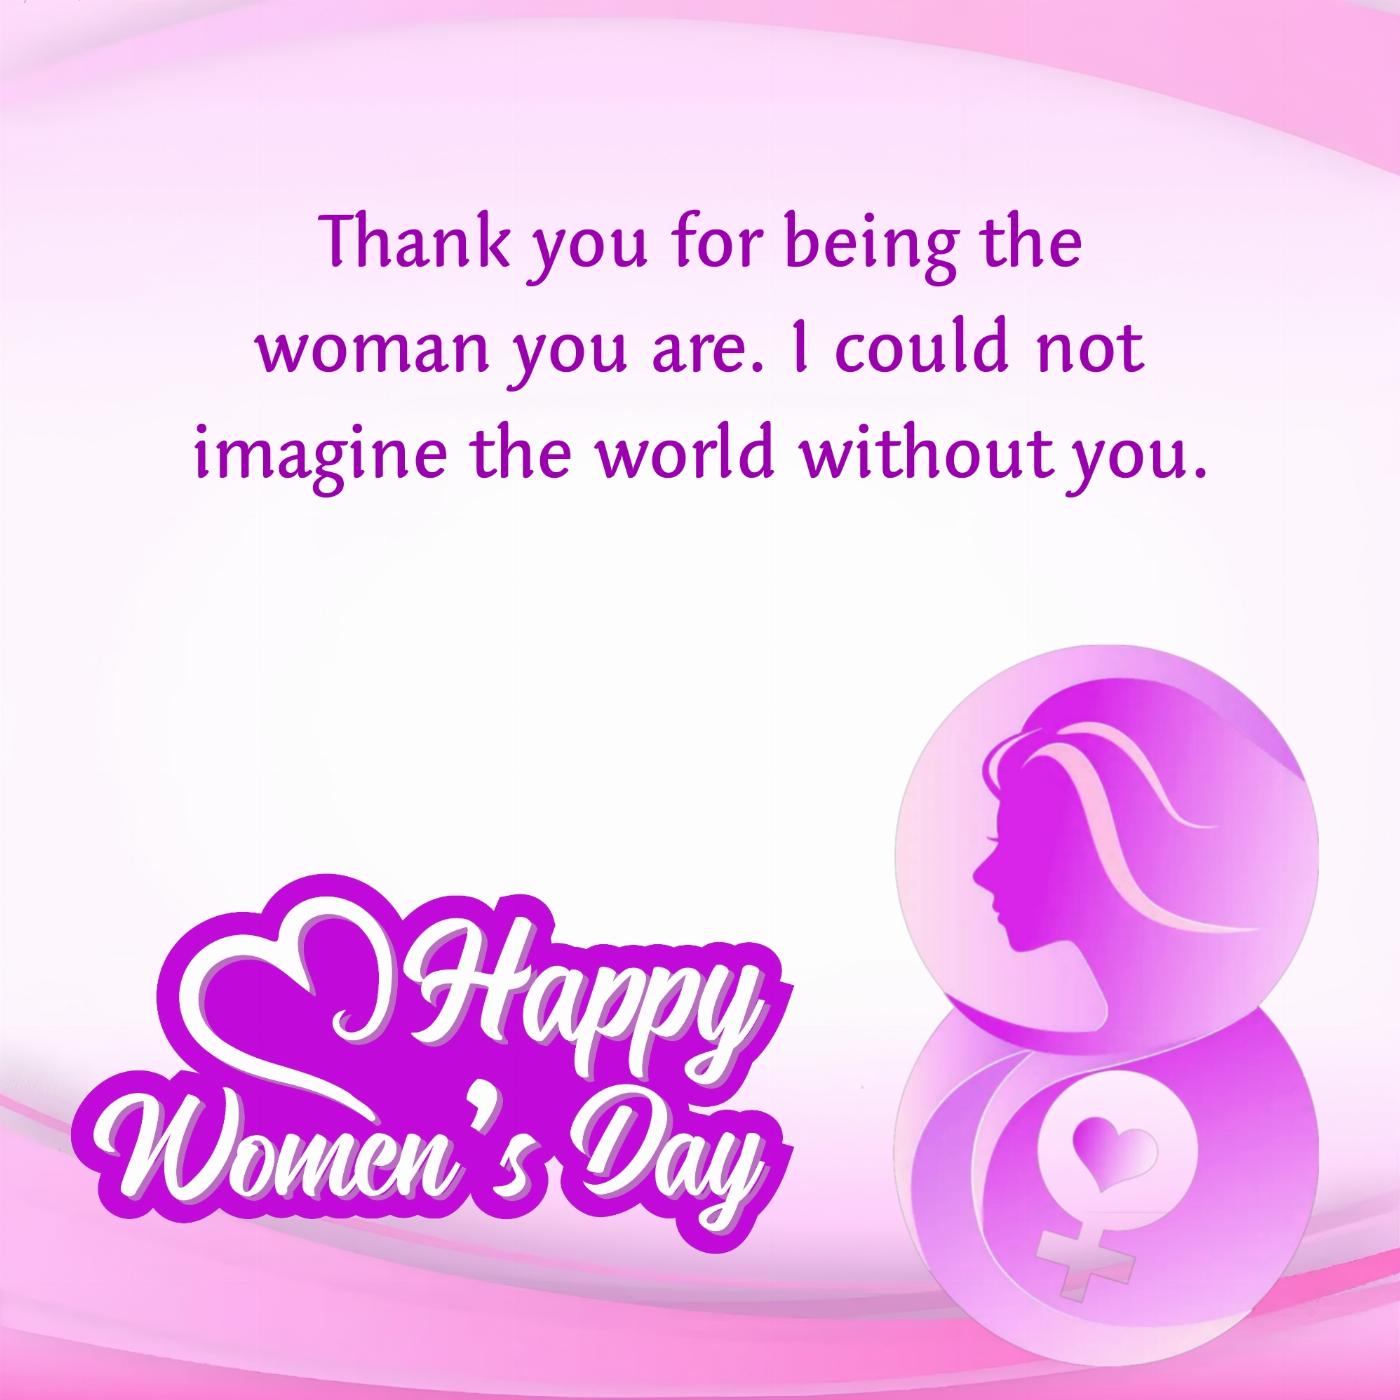 Thank you for being the woman you are